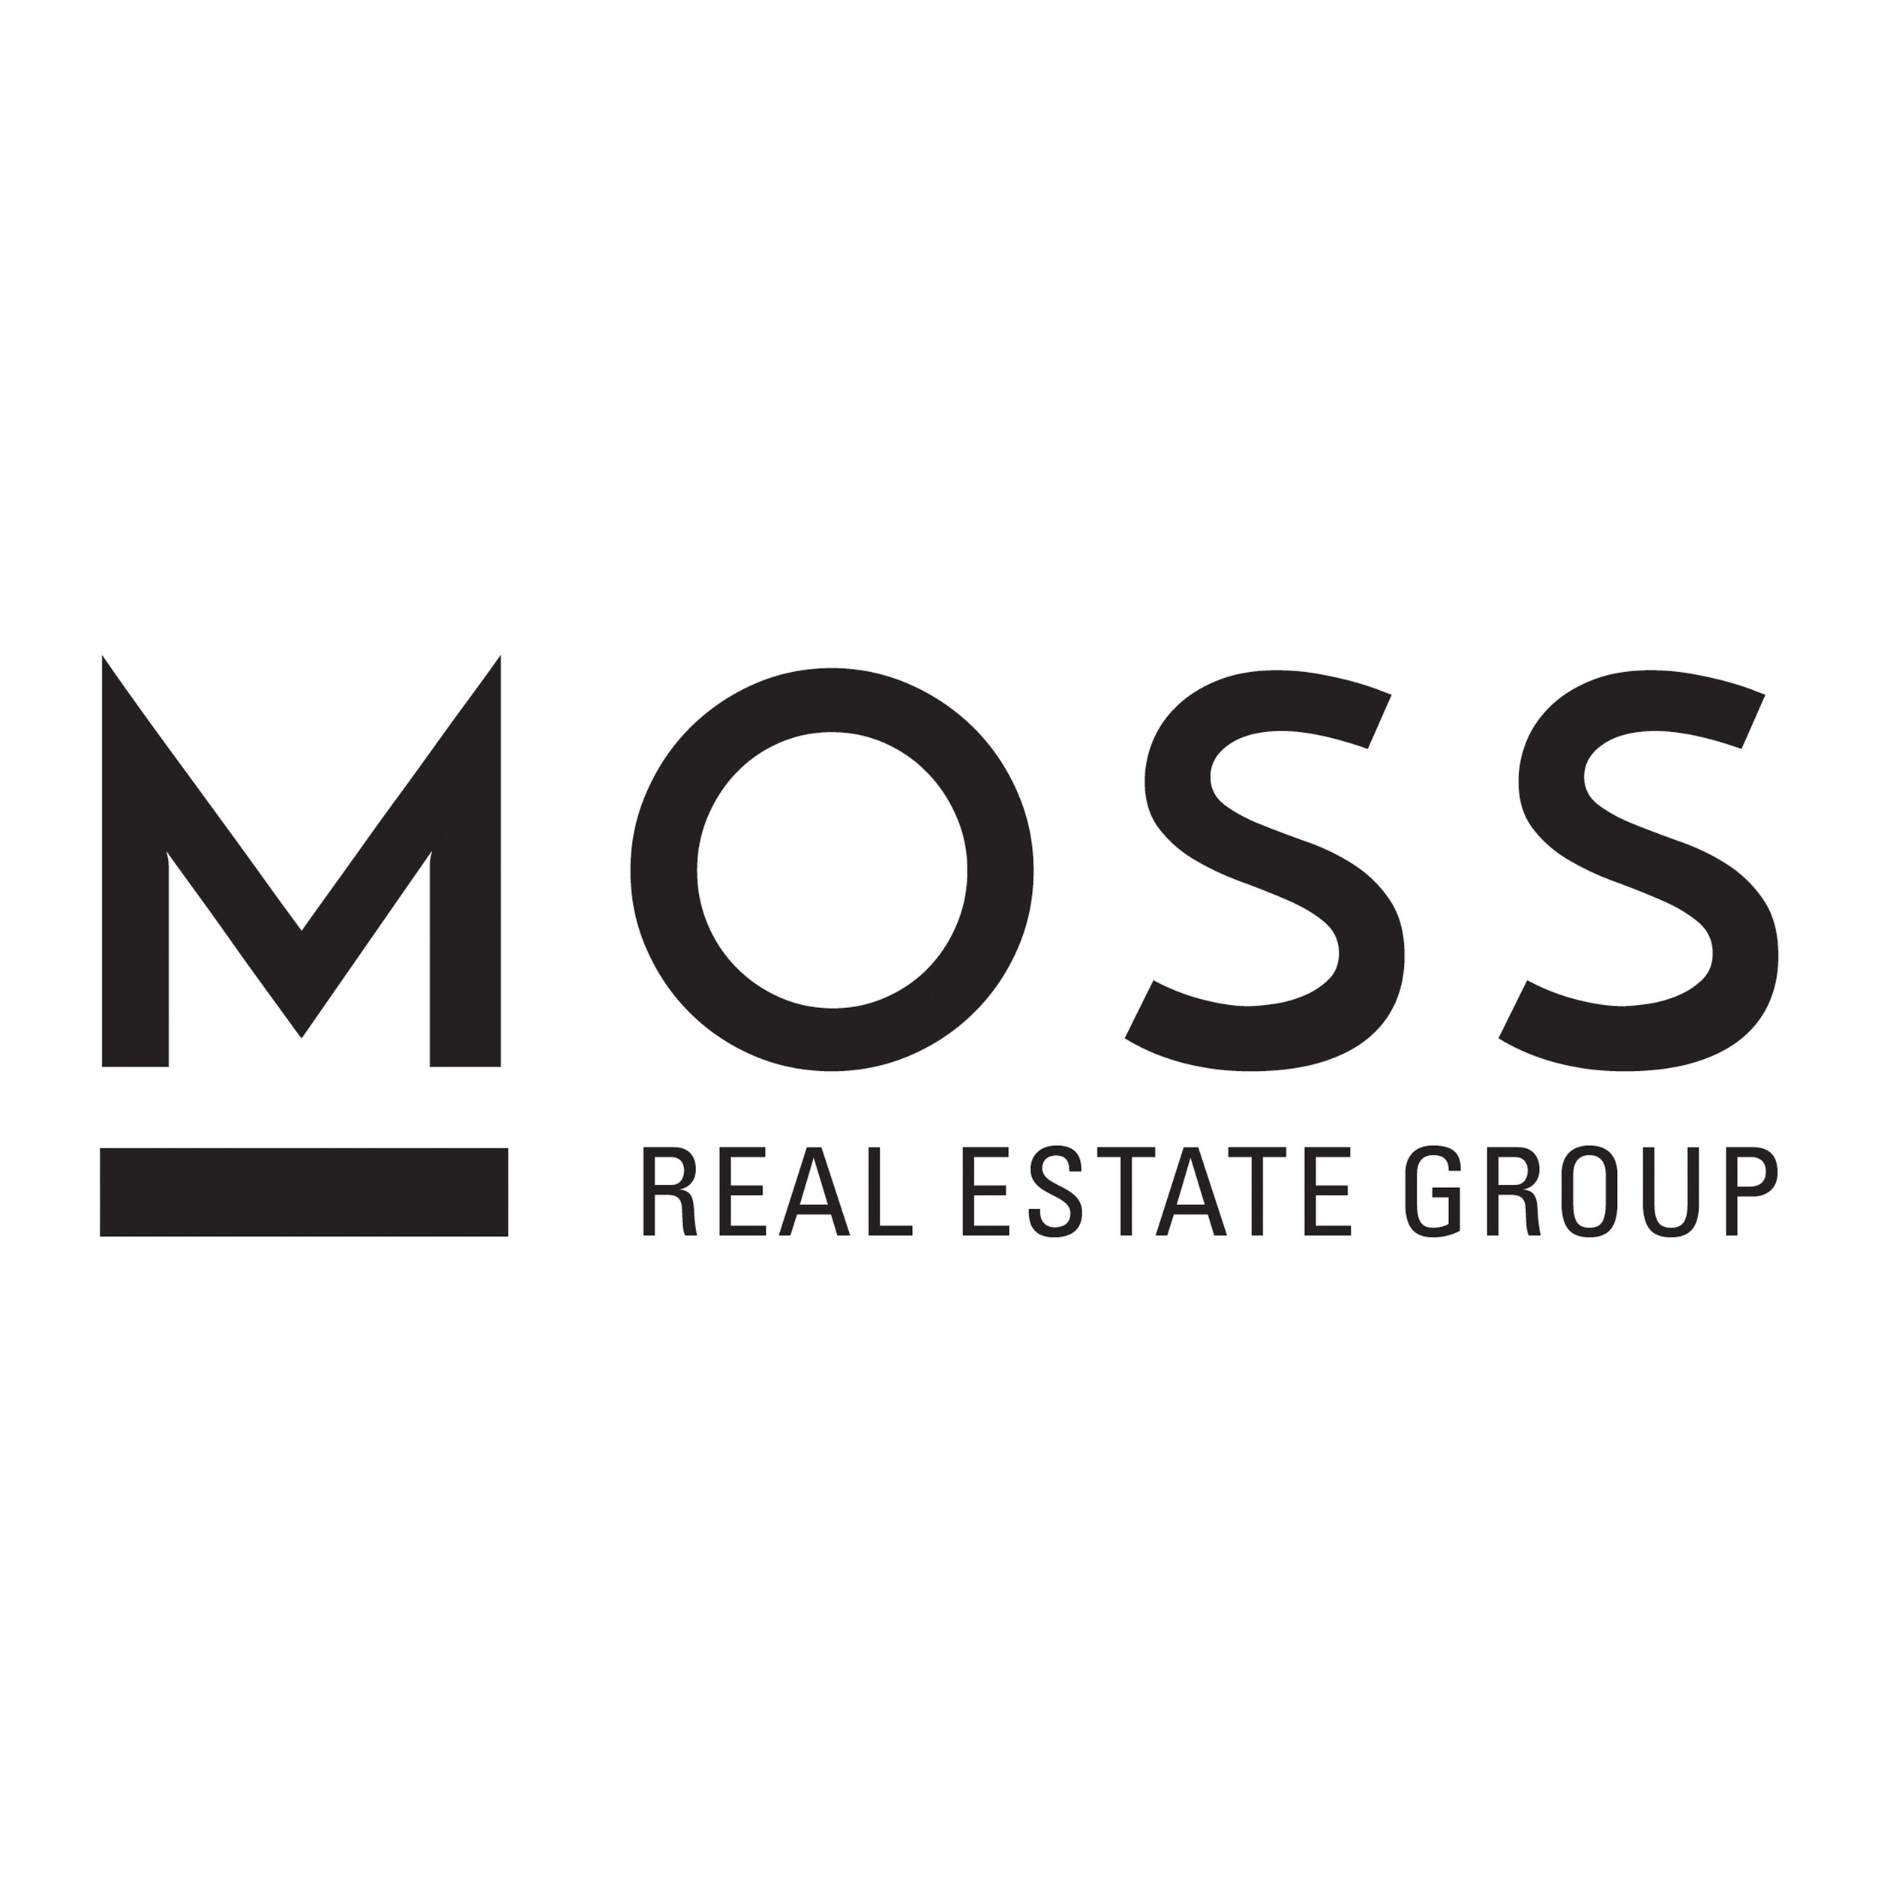 The logo of Real Estate Group